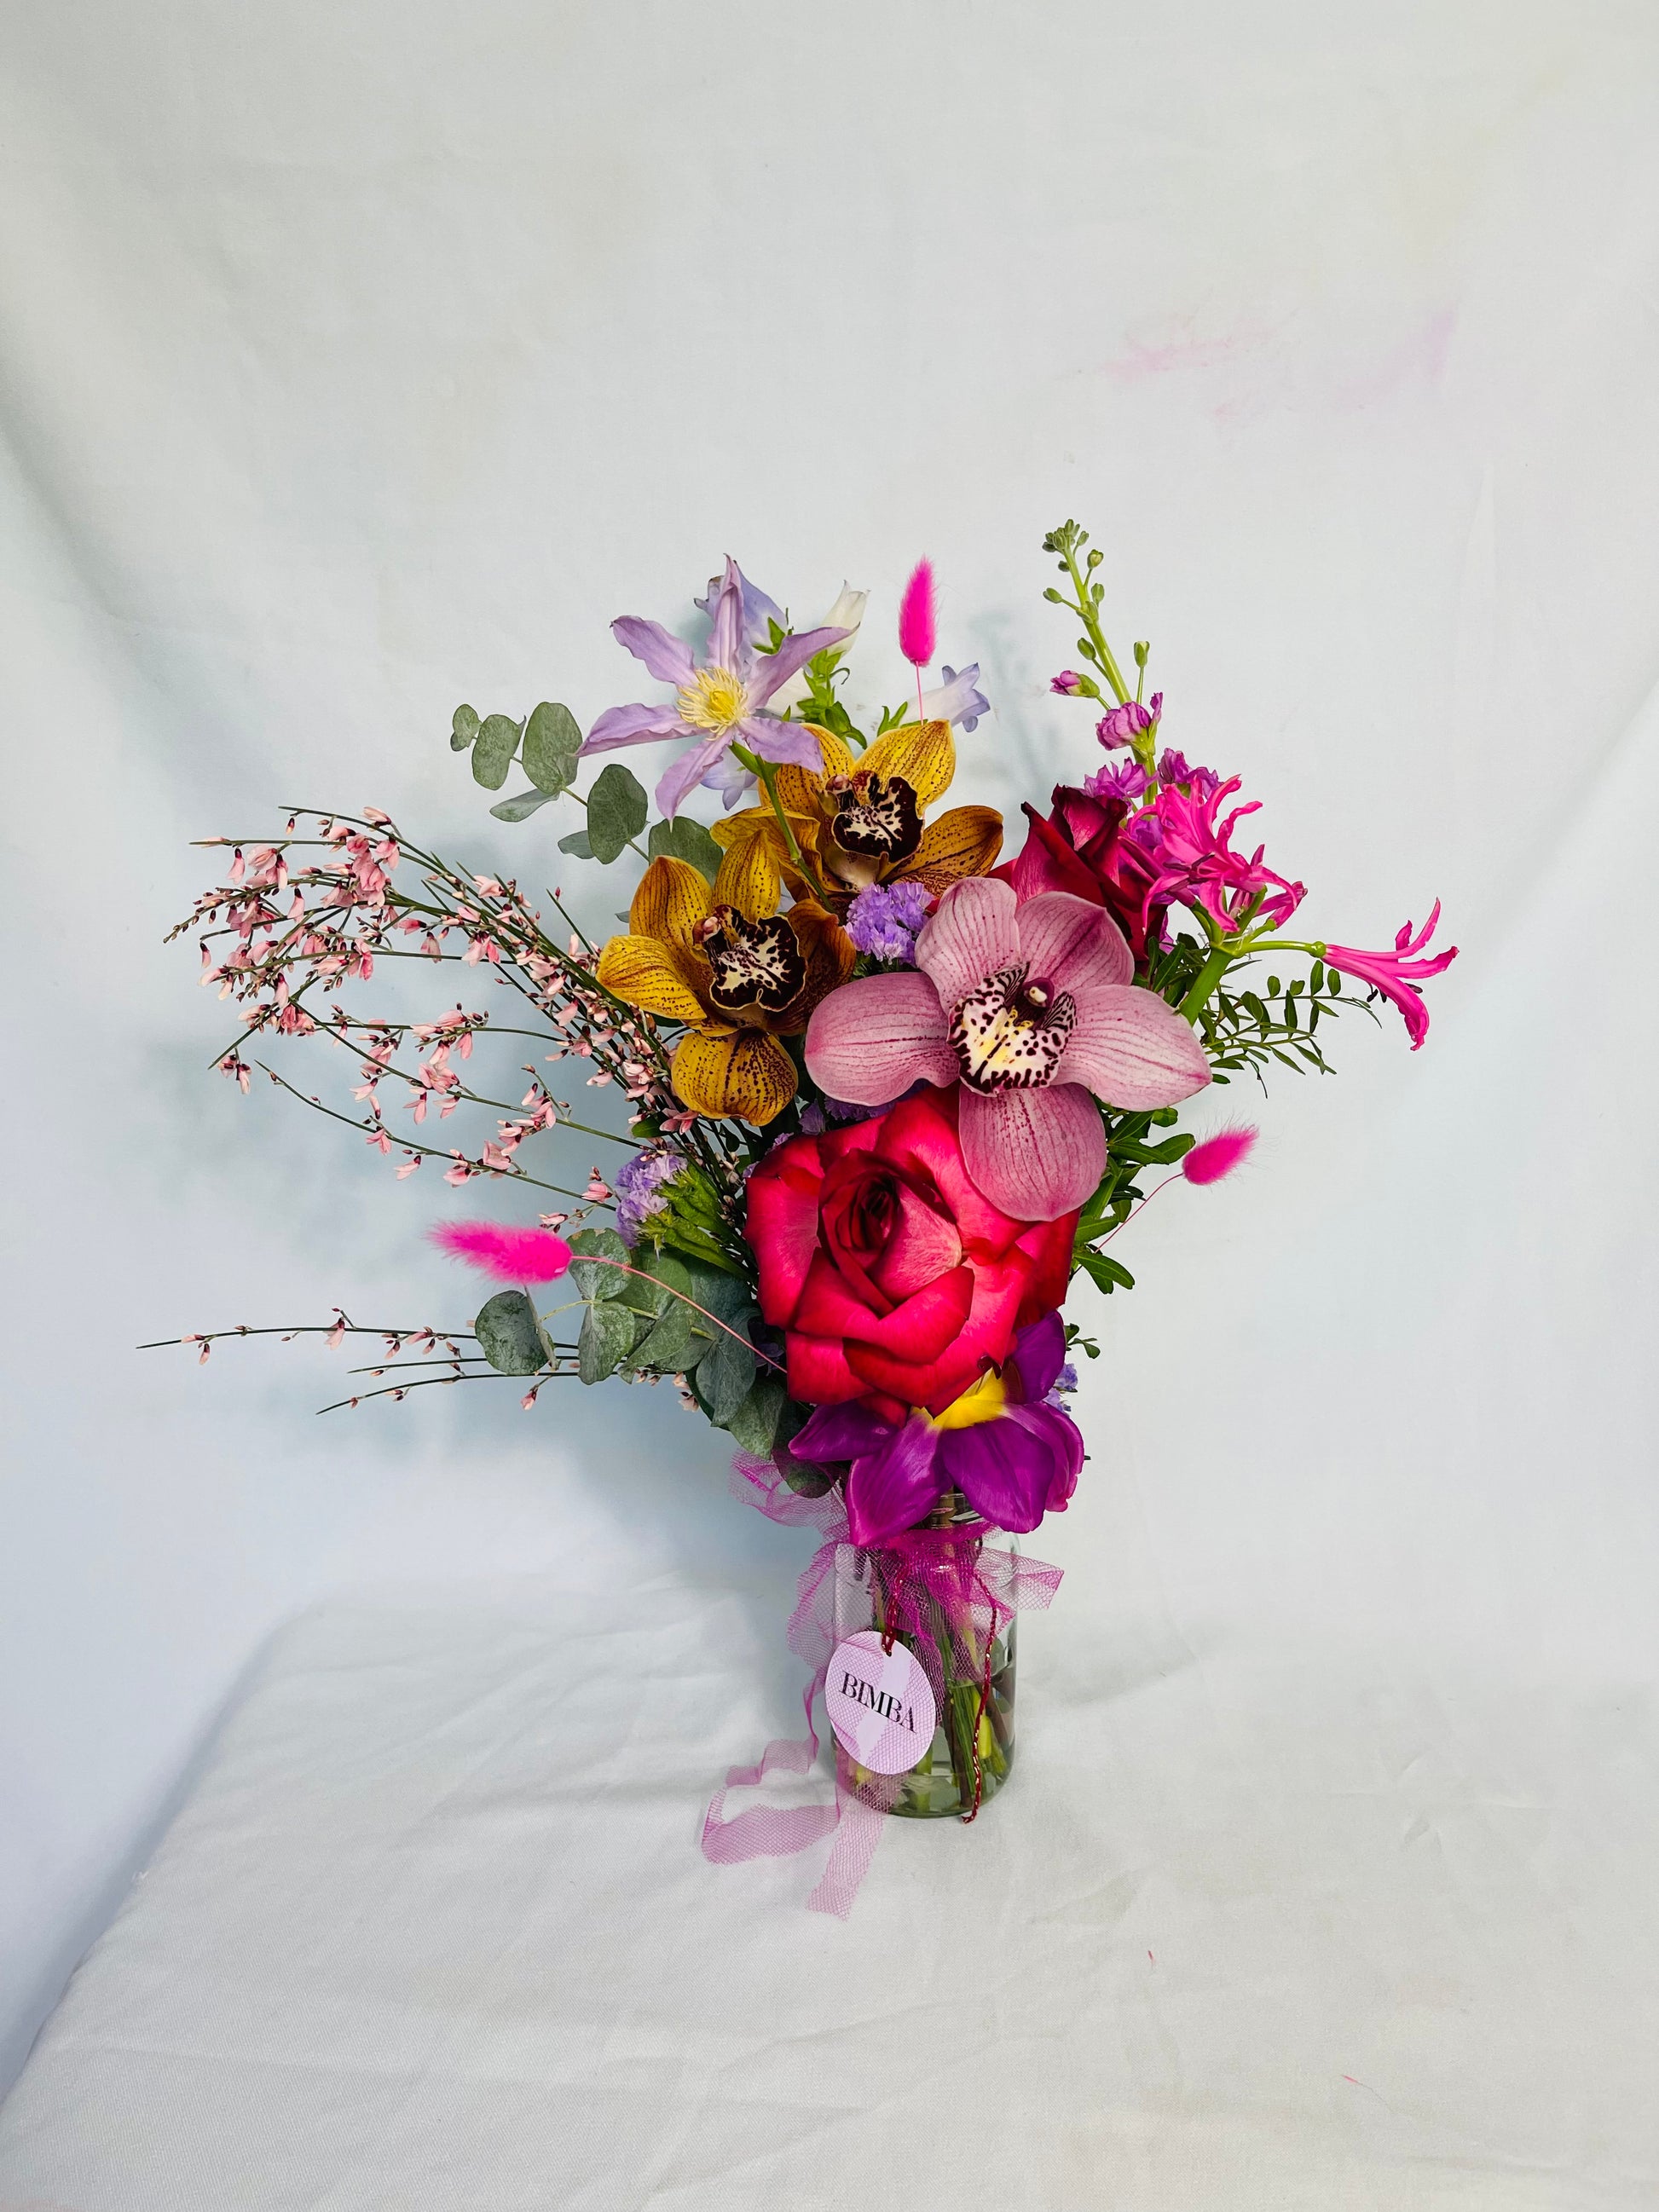 CHA- CHA- CHA Bouquet Beautiful flower arrangement featuring blooms in reds, purples, pinks and with yellow accents.  Like roses, luxury orchids, sweet scented stock, hot pink asparagus, playful bunny tails and eucalyptus. Arriving with a glass vase ready to enjoy.